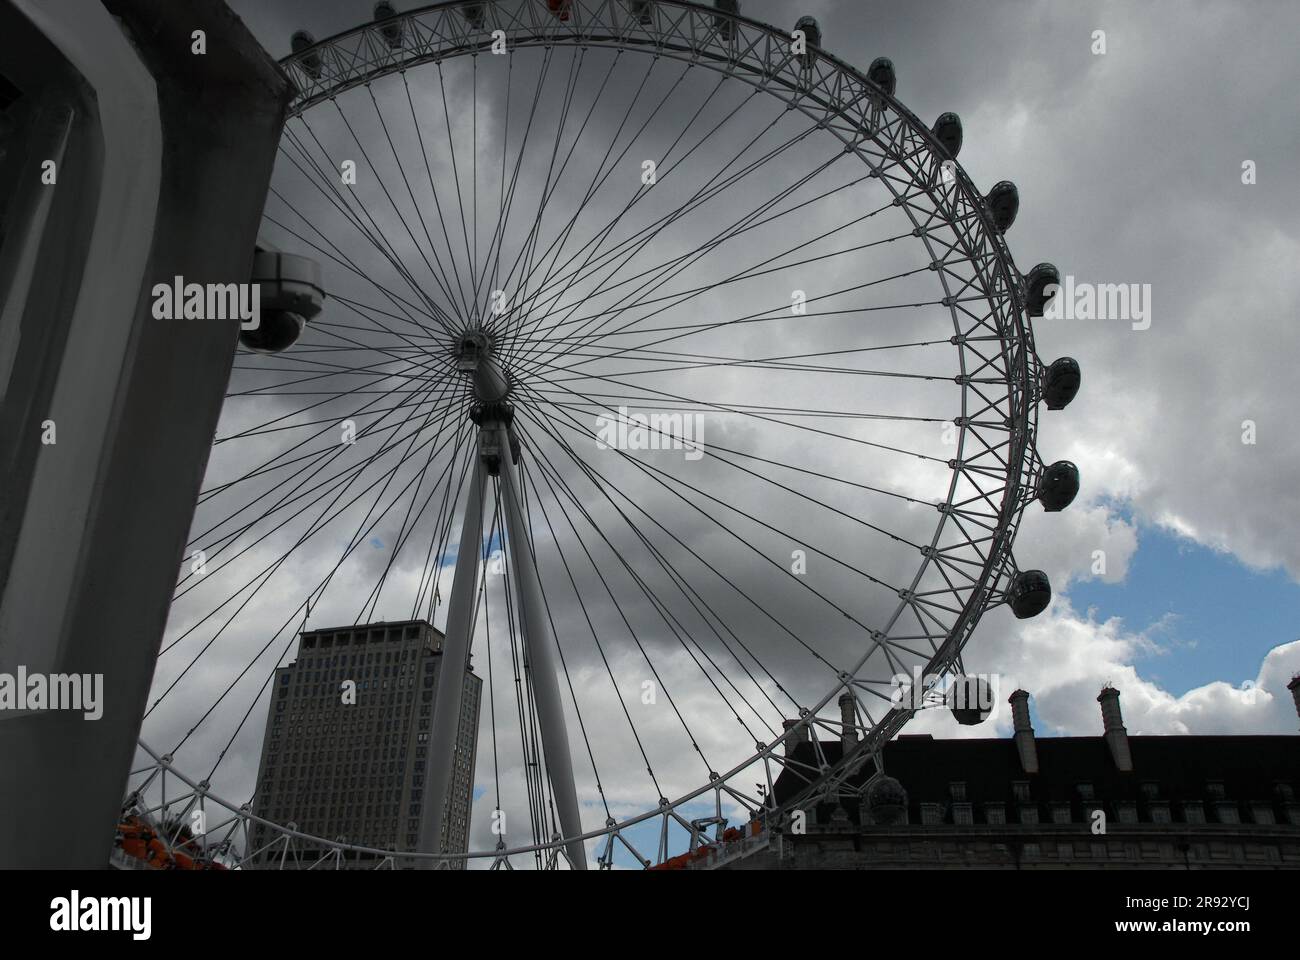 A photo of the 'London Eye' on a dark cloudy day in London, England, UK.. Stock Photo